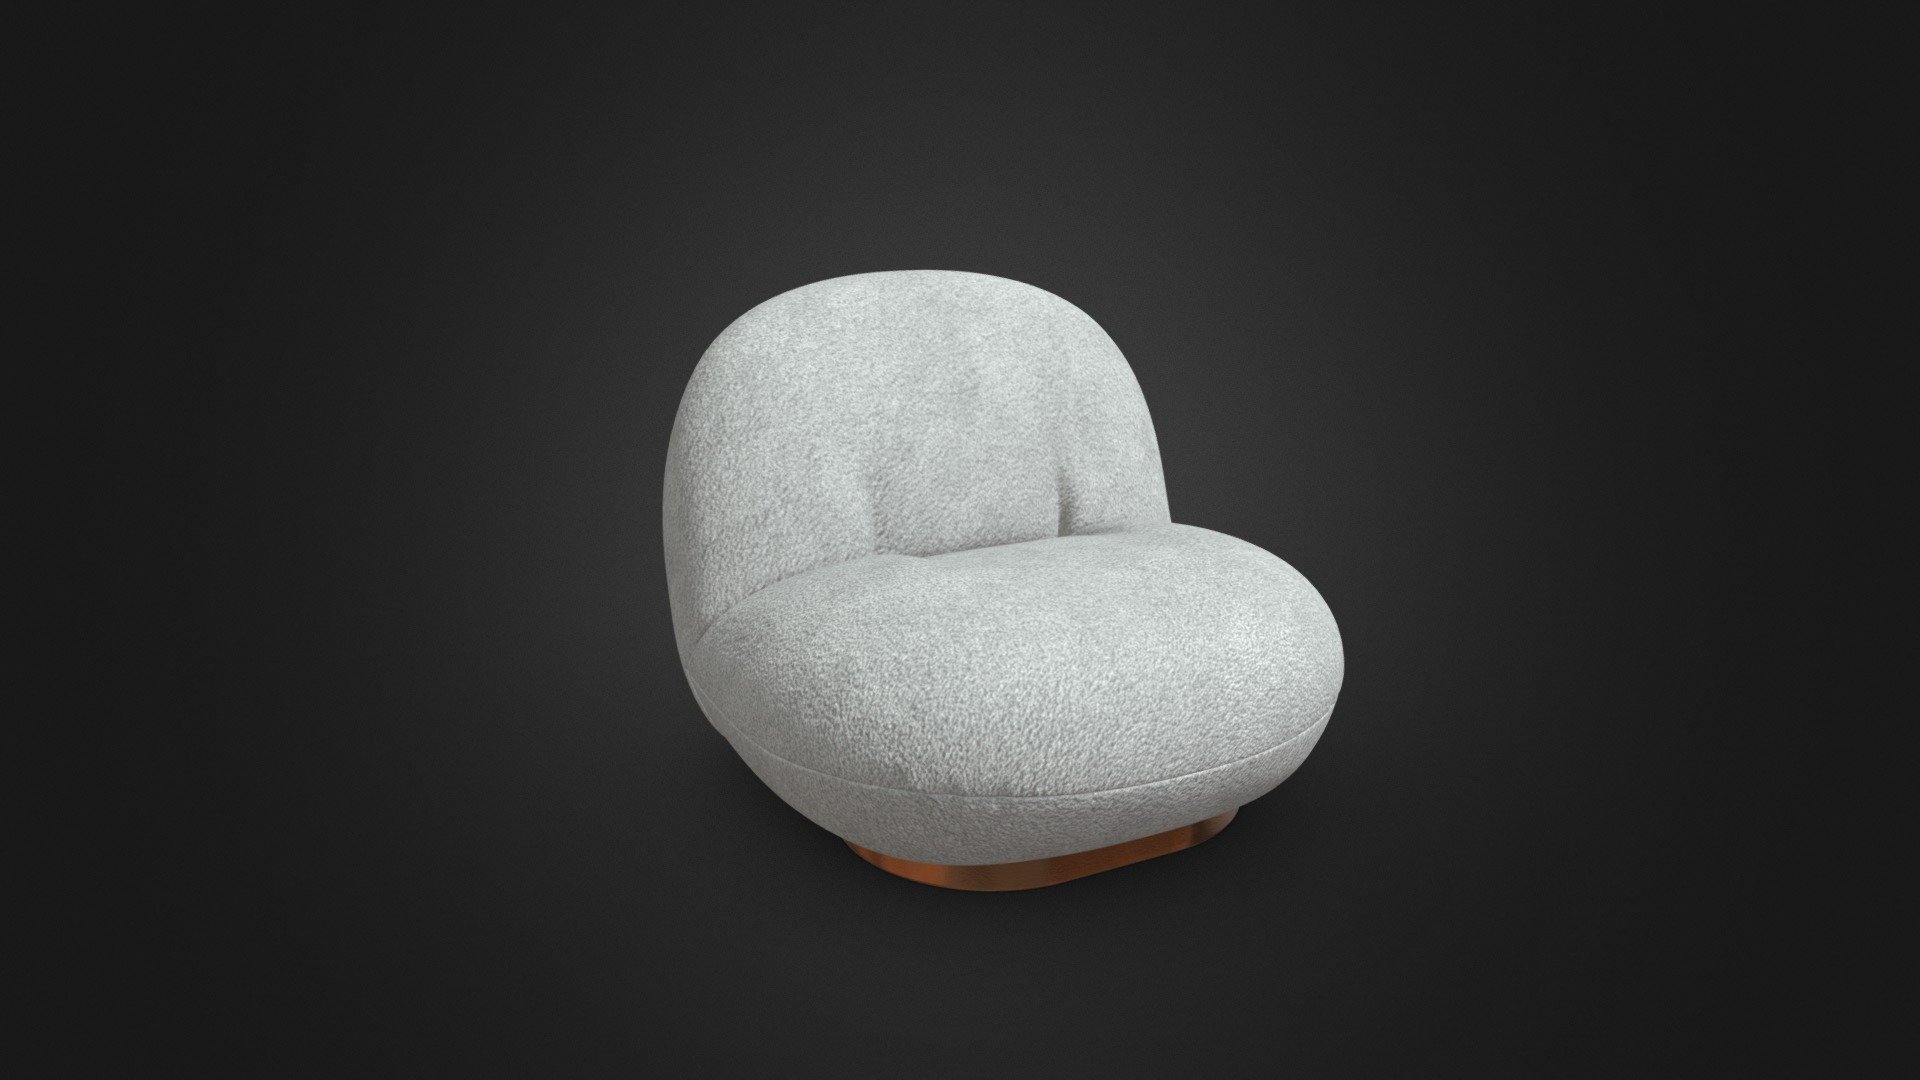 DIMENSIONS: H 65 x L 77 x D 85 cm

3d model of a Pacha Lounge Chair by Gubi.
Best use for adding detail on your Architectural Visualization or Interior Design.
This product is made in Blender and ready to render in Cycle. Unit setup is metres and the models are scaled to match real life objects.
The model comes with textures and materials and is positioned in the center of the coordinates system.
No additional plugin is needed to open the model.

Notes:

Geometry: Polygonal

Textures: Yes

Rigged: No

Animated: No

UV Mapped: Yes

Unwrapped UVs: Yes, non-overlapping

Bake all map

Hope you like it! Thank you!

My youtube channel : https://www.youtube.com/toss90 - Pacha Lounge Chair by Gubi - Buy Royalty Free 3D model by Toss90 3d model